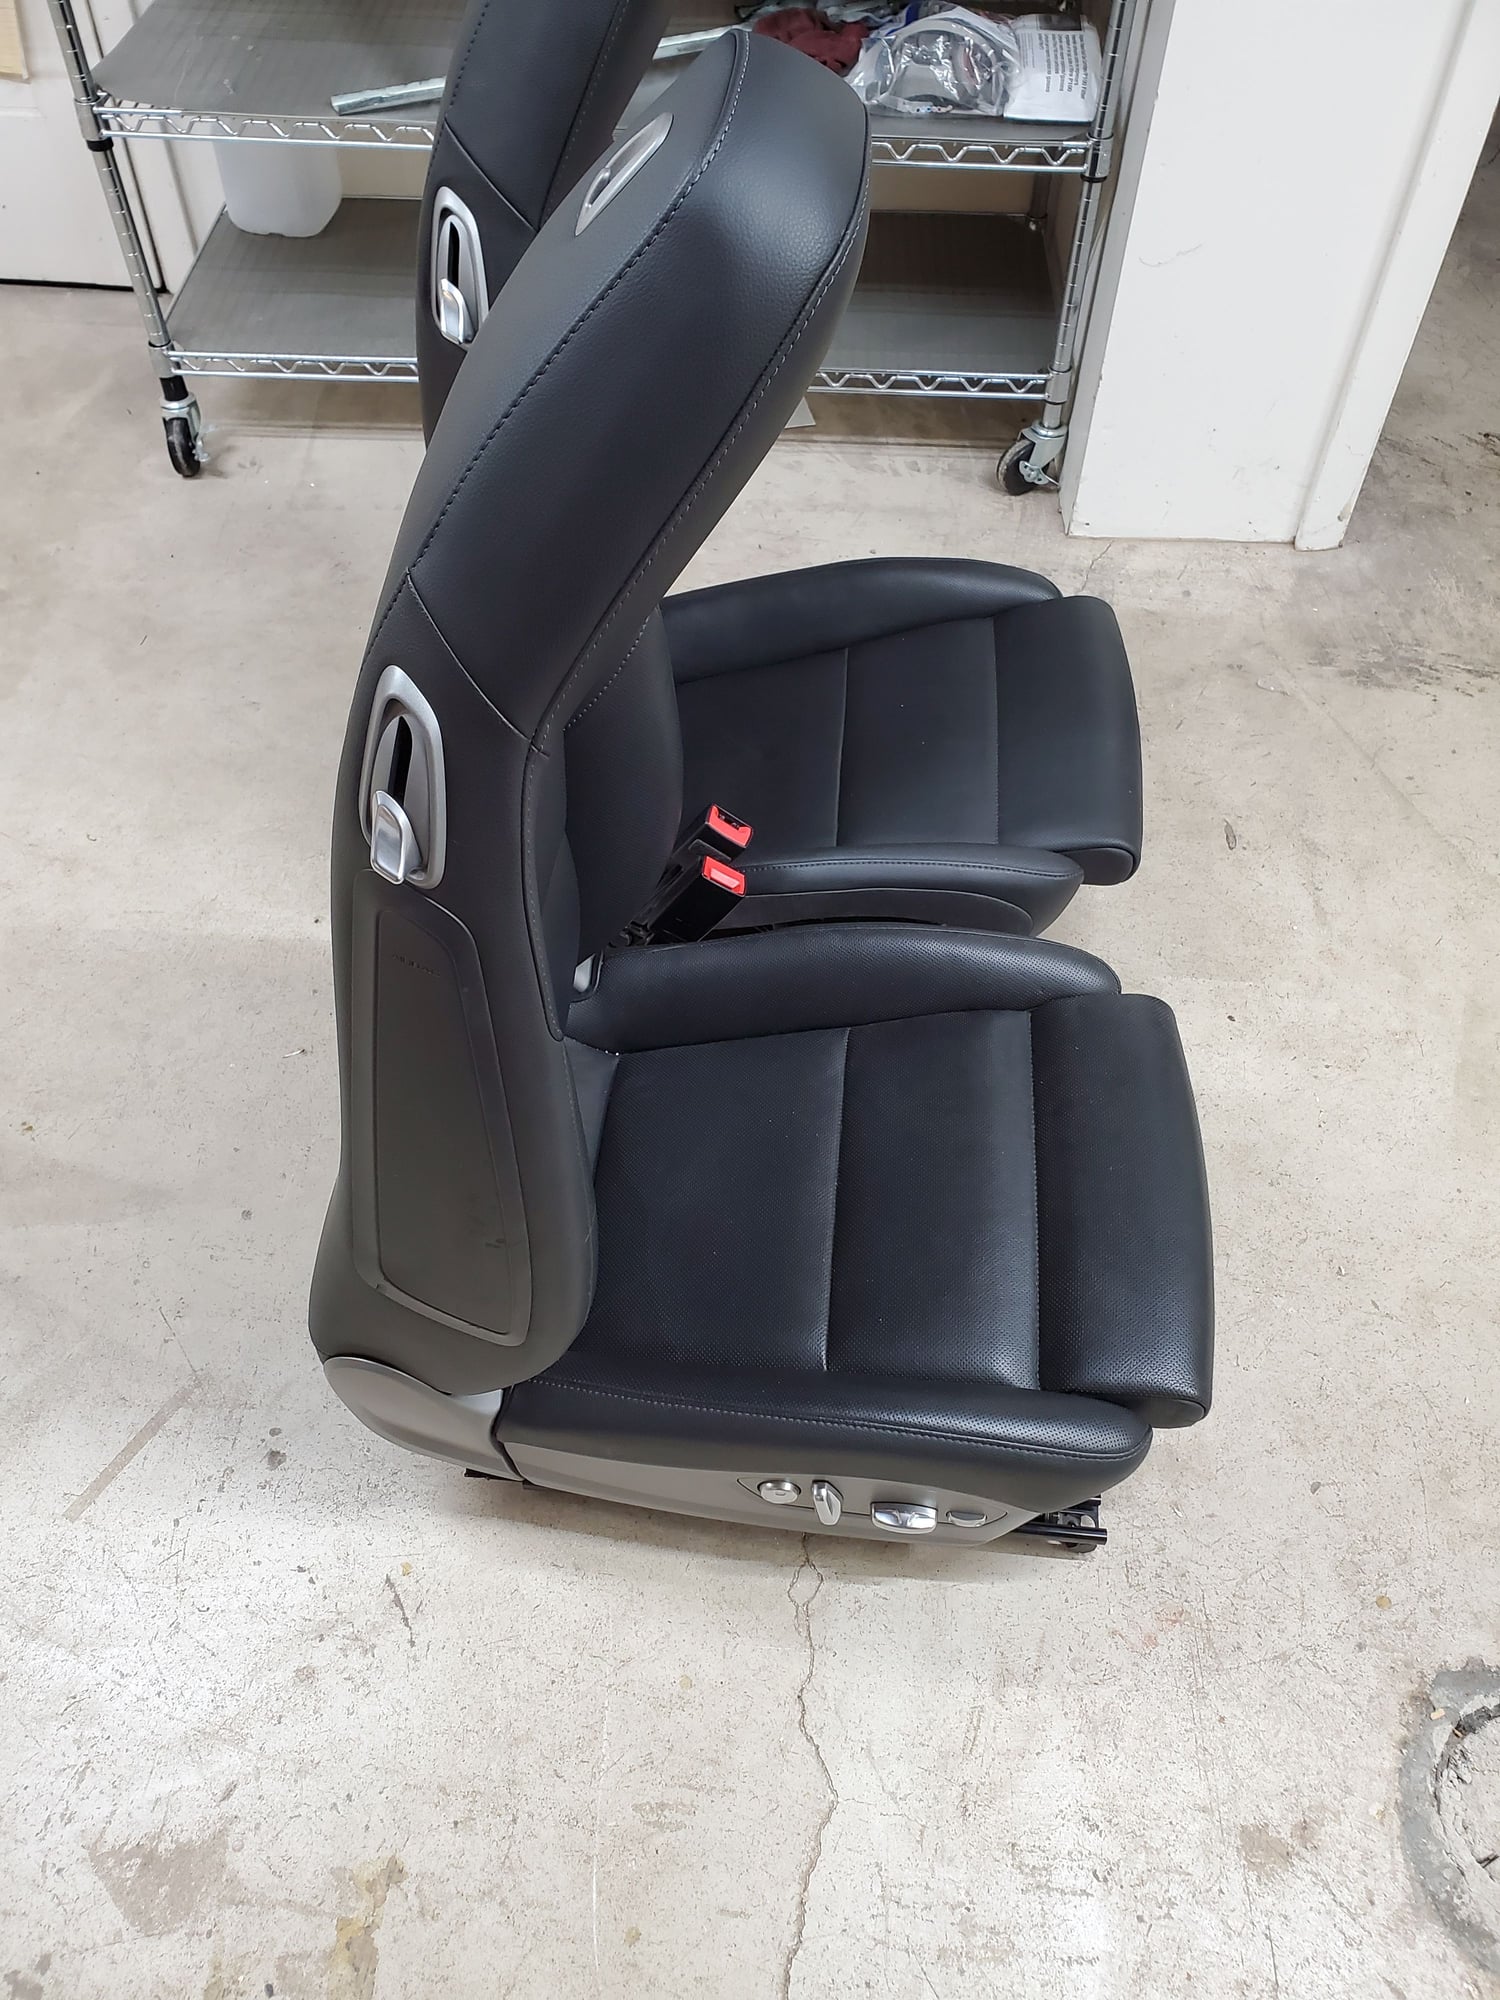 Interior/Upholstery - 981 Power Sport Seats 14-Way (Heated & Ventilated) w/ Memory - Used - 2014 to 2016 Porsche Cayman - Milwaukee, WI 53217, United States